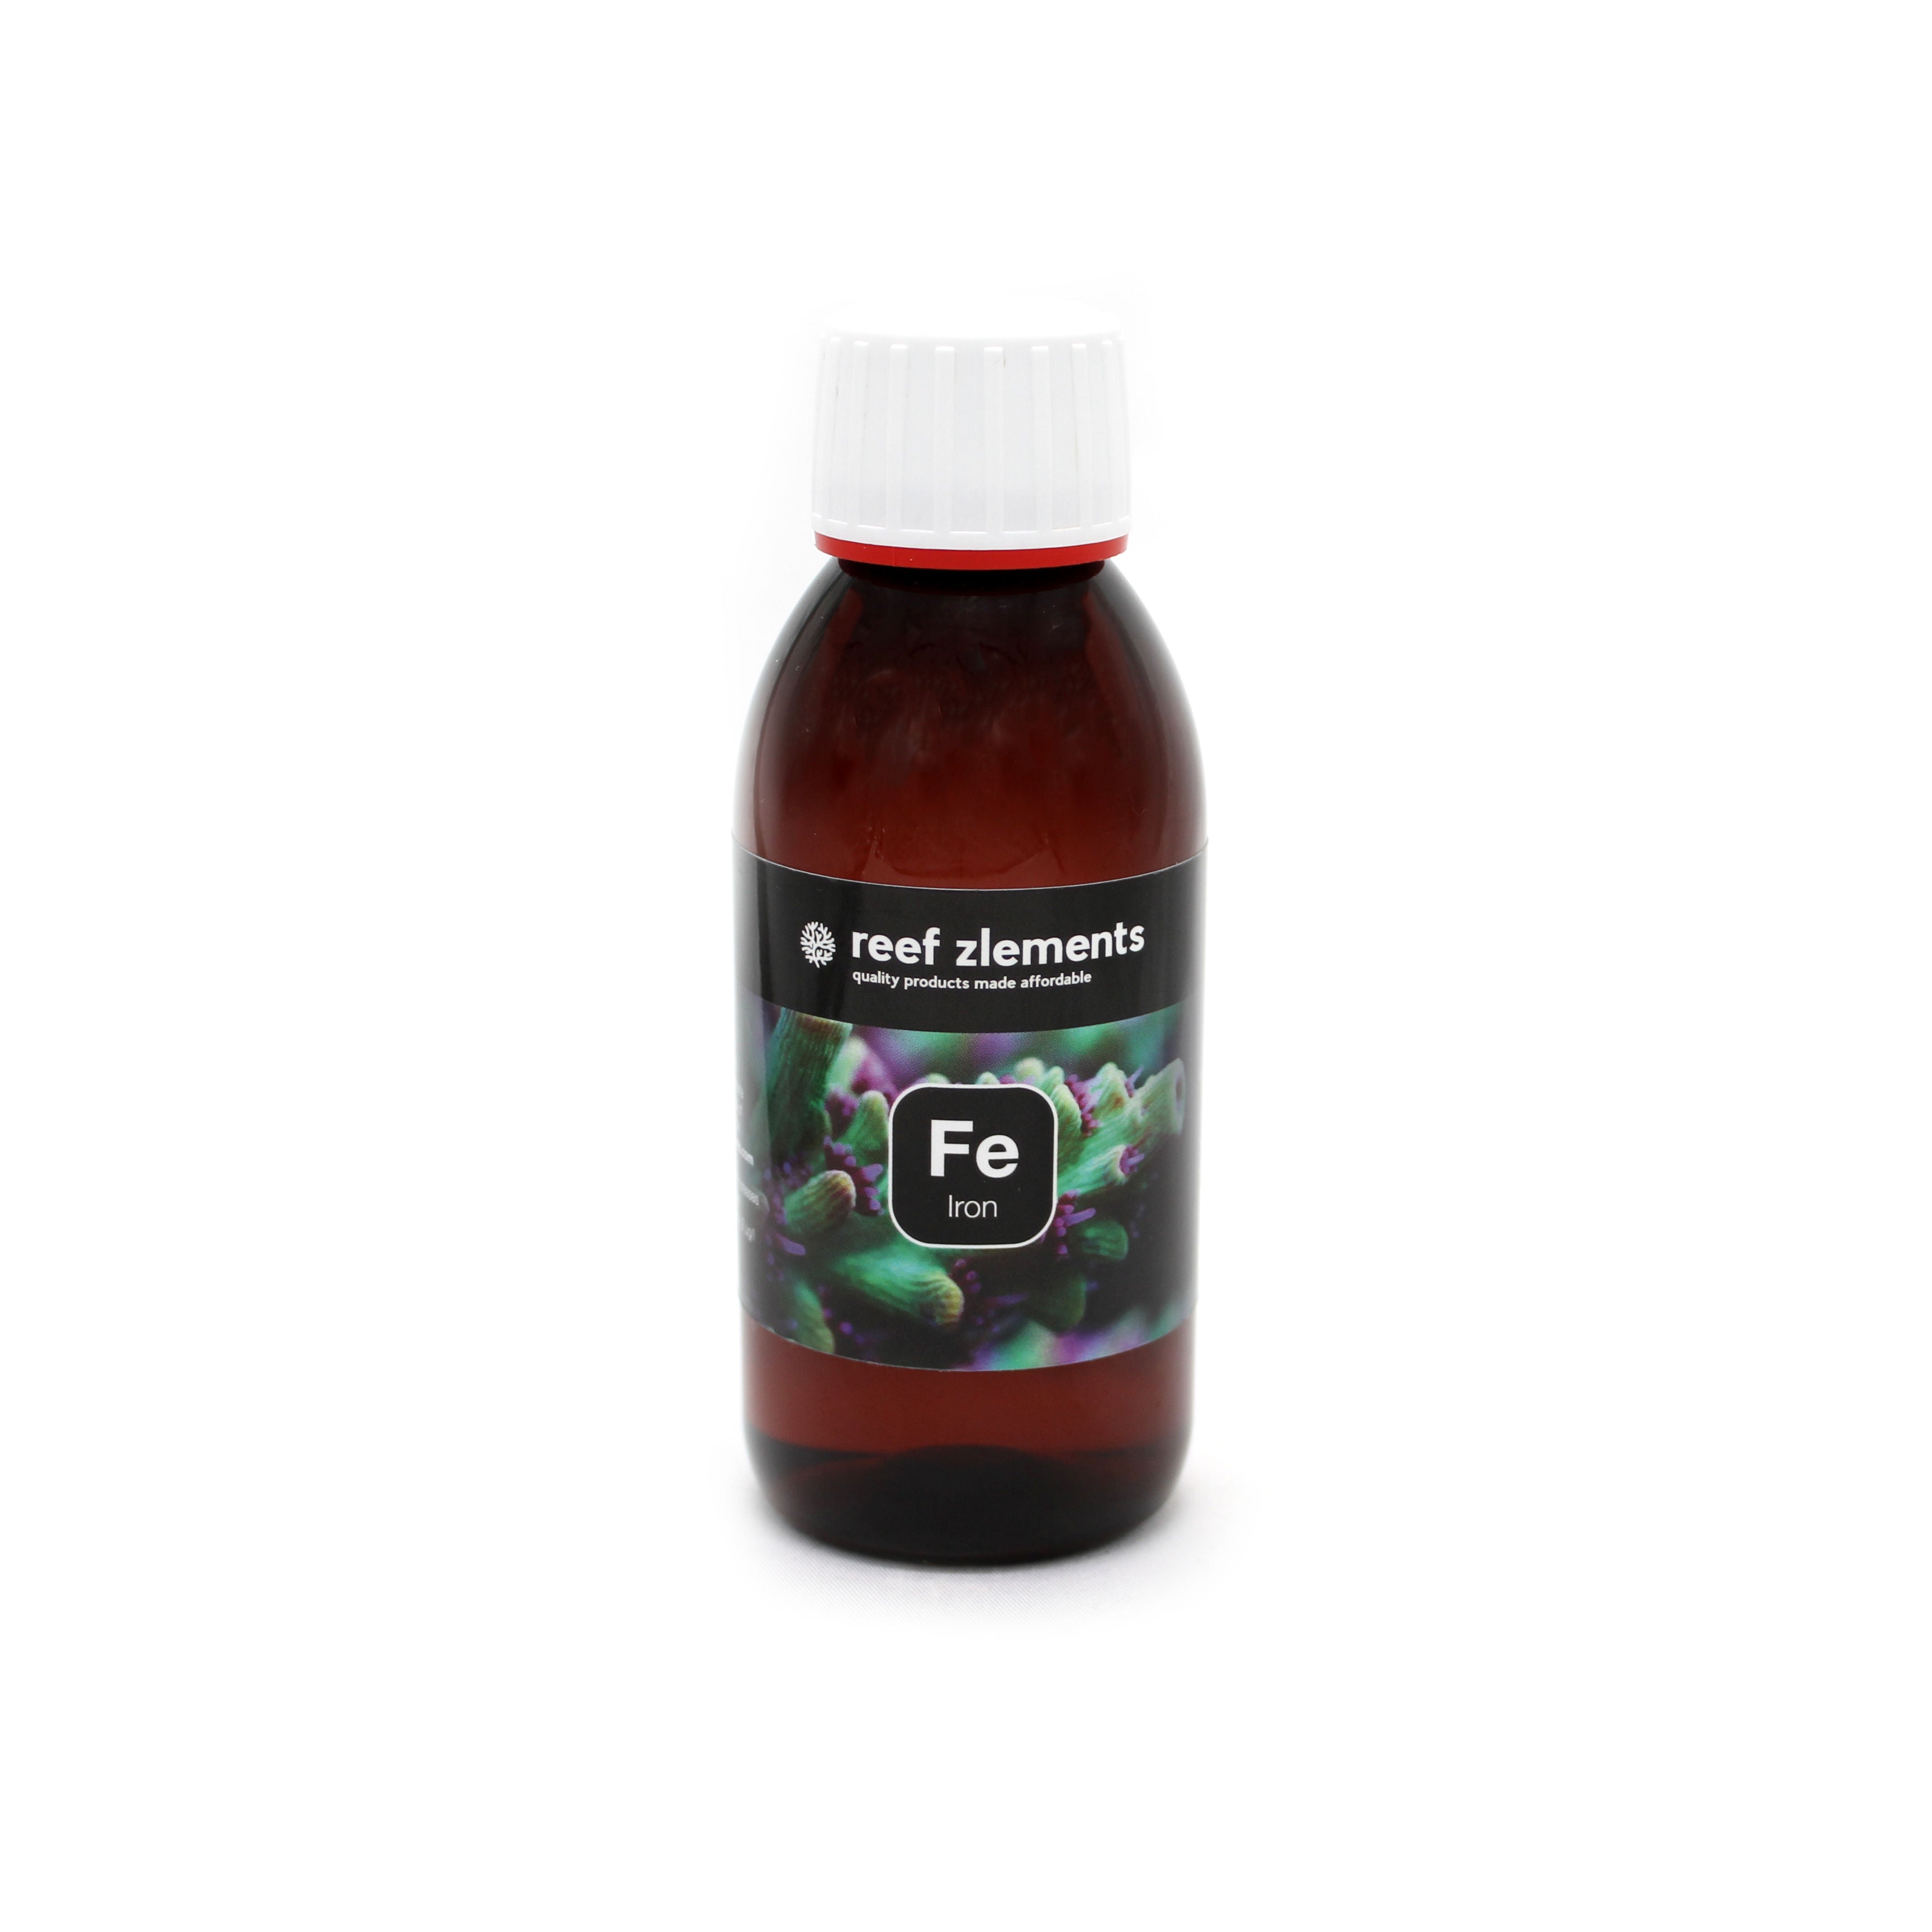 Reef Zlements Trace Elements - Iron - 150ml